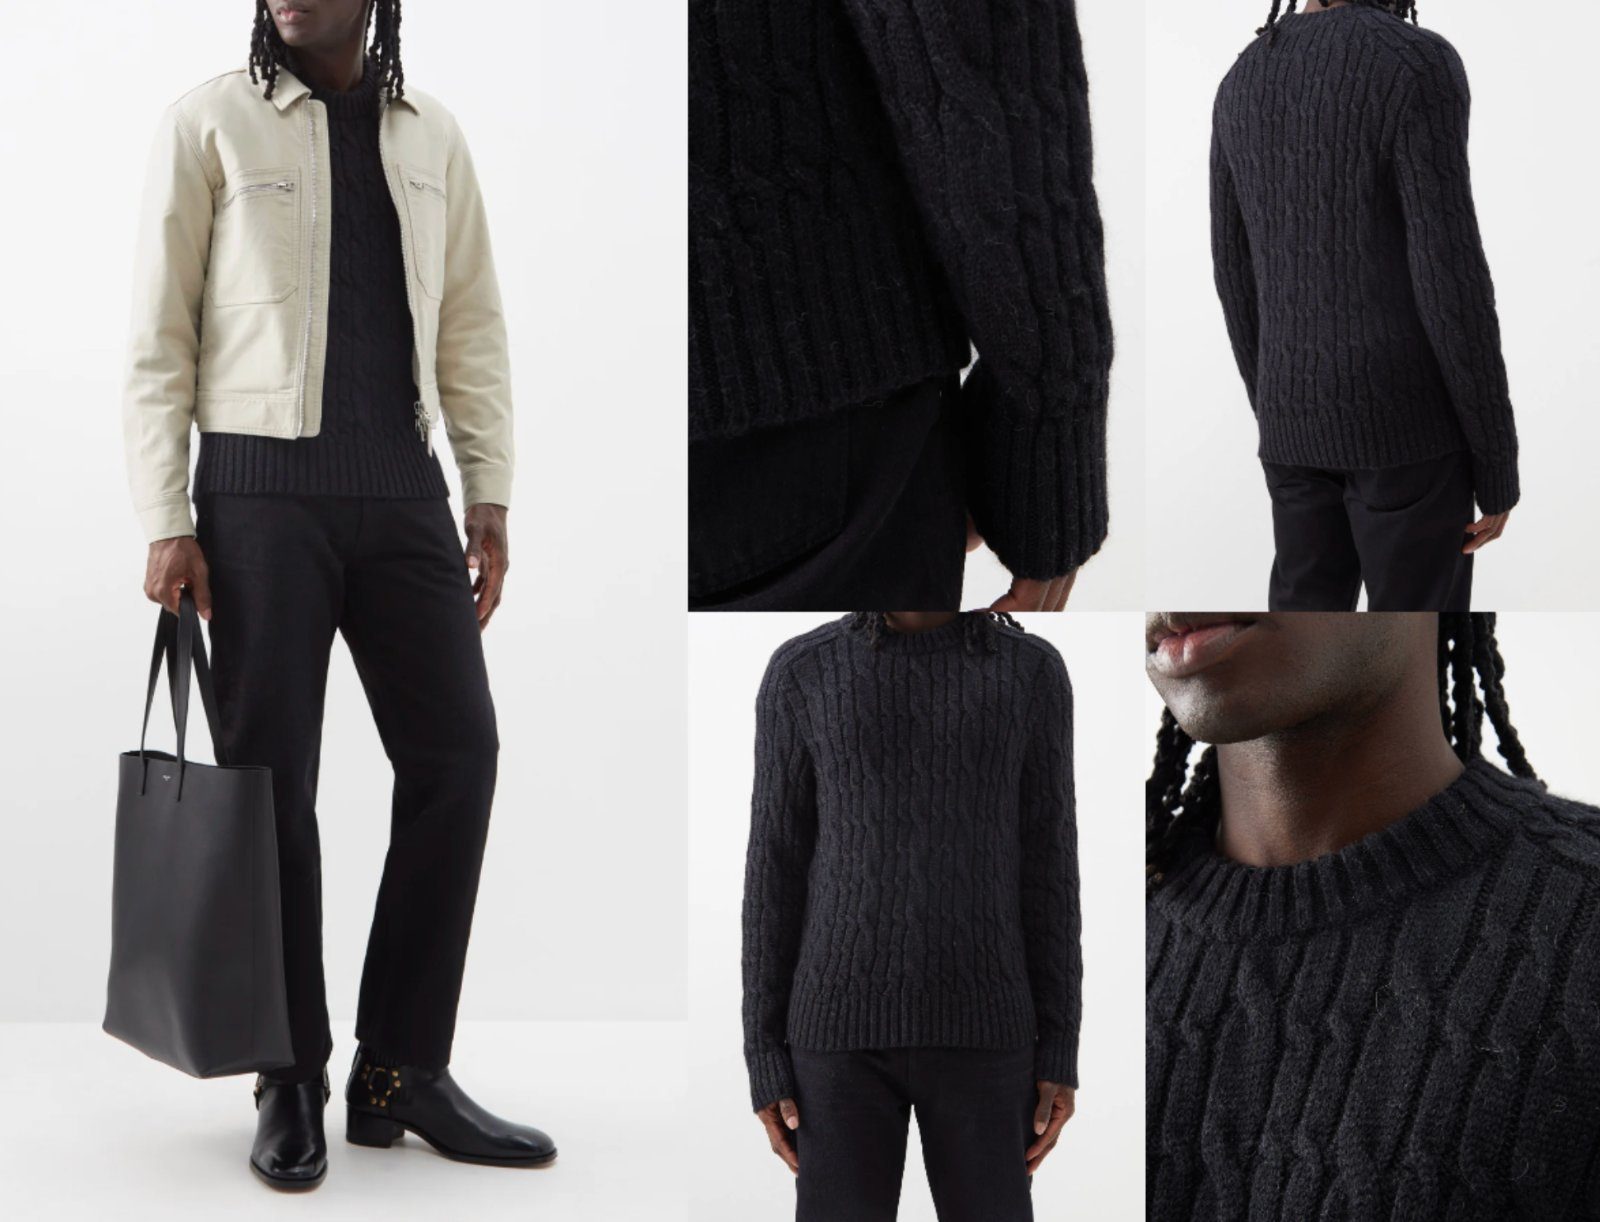 Tom Ford Strickpullover TOM FORD Crew-neck Cable-Knit Sweater Jumper Sweatshirt Strick-Pulli P